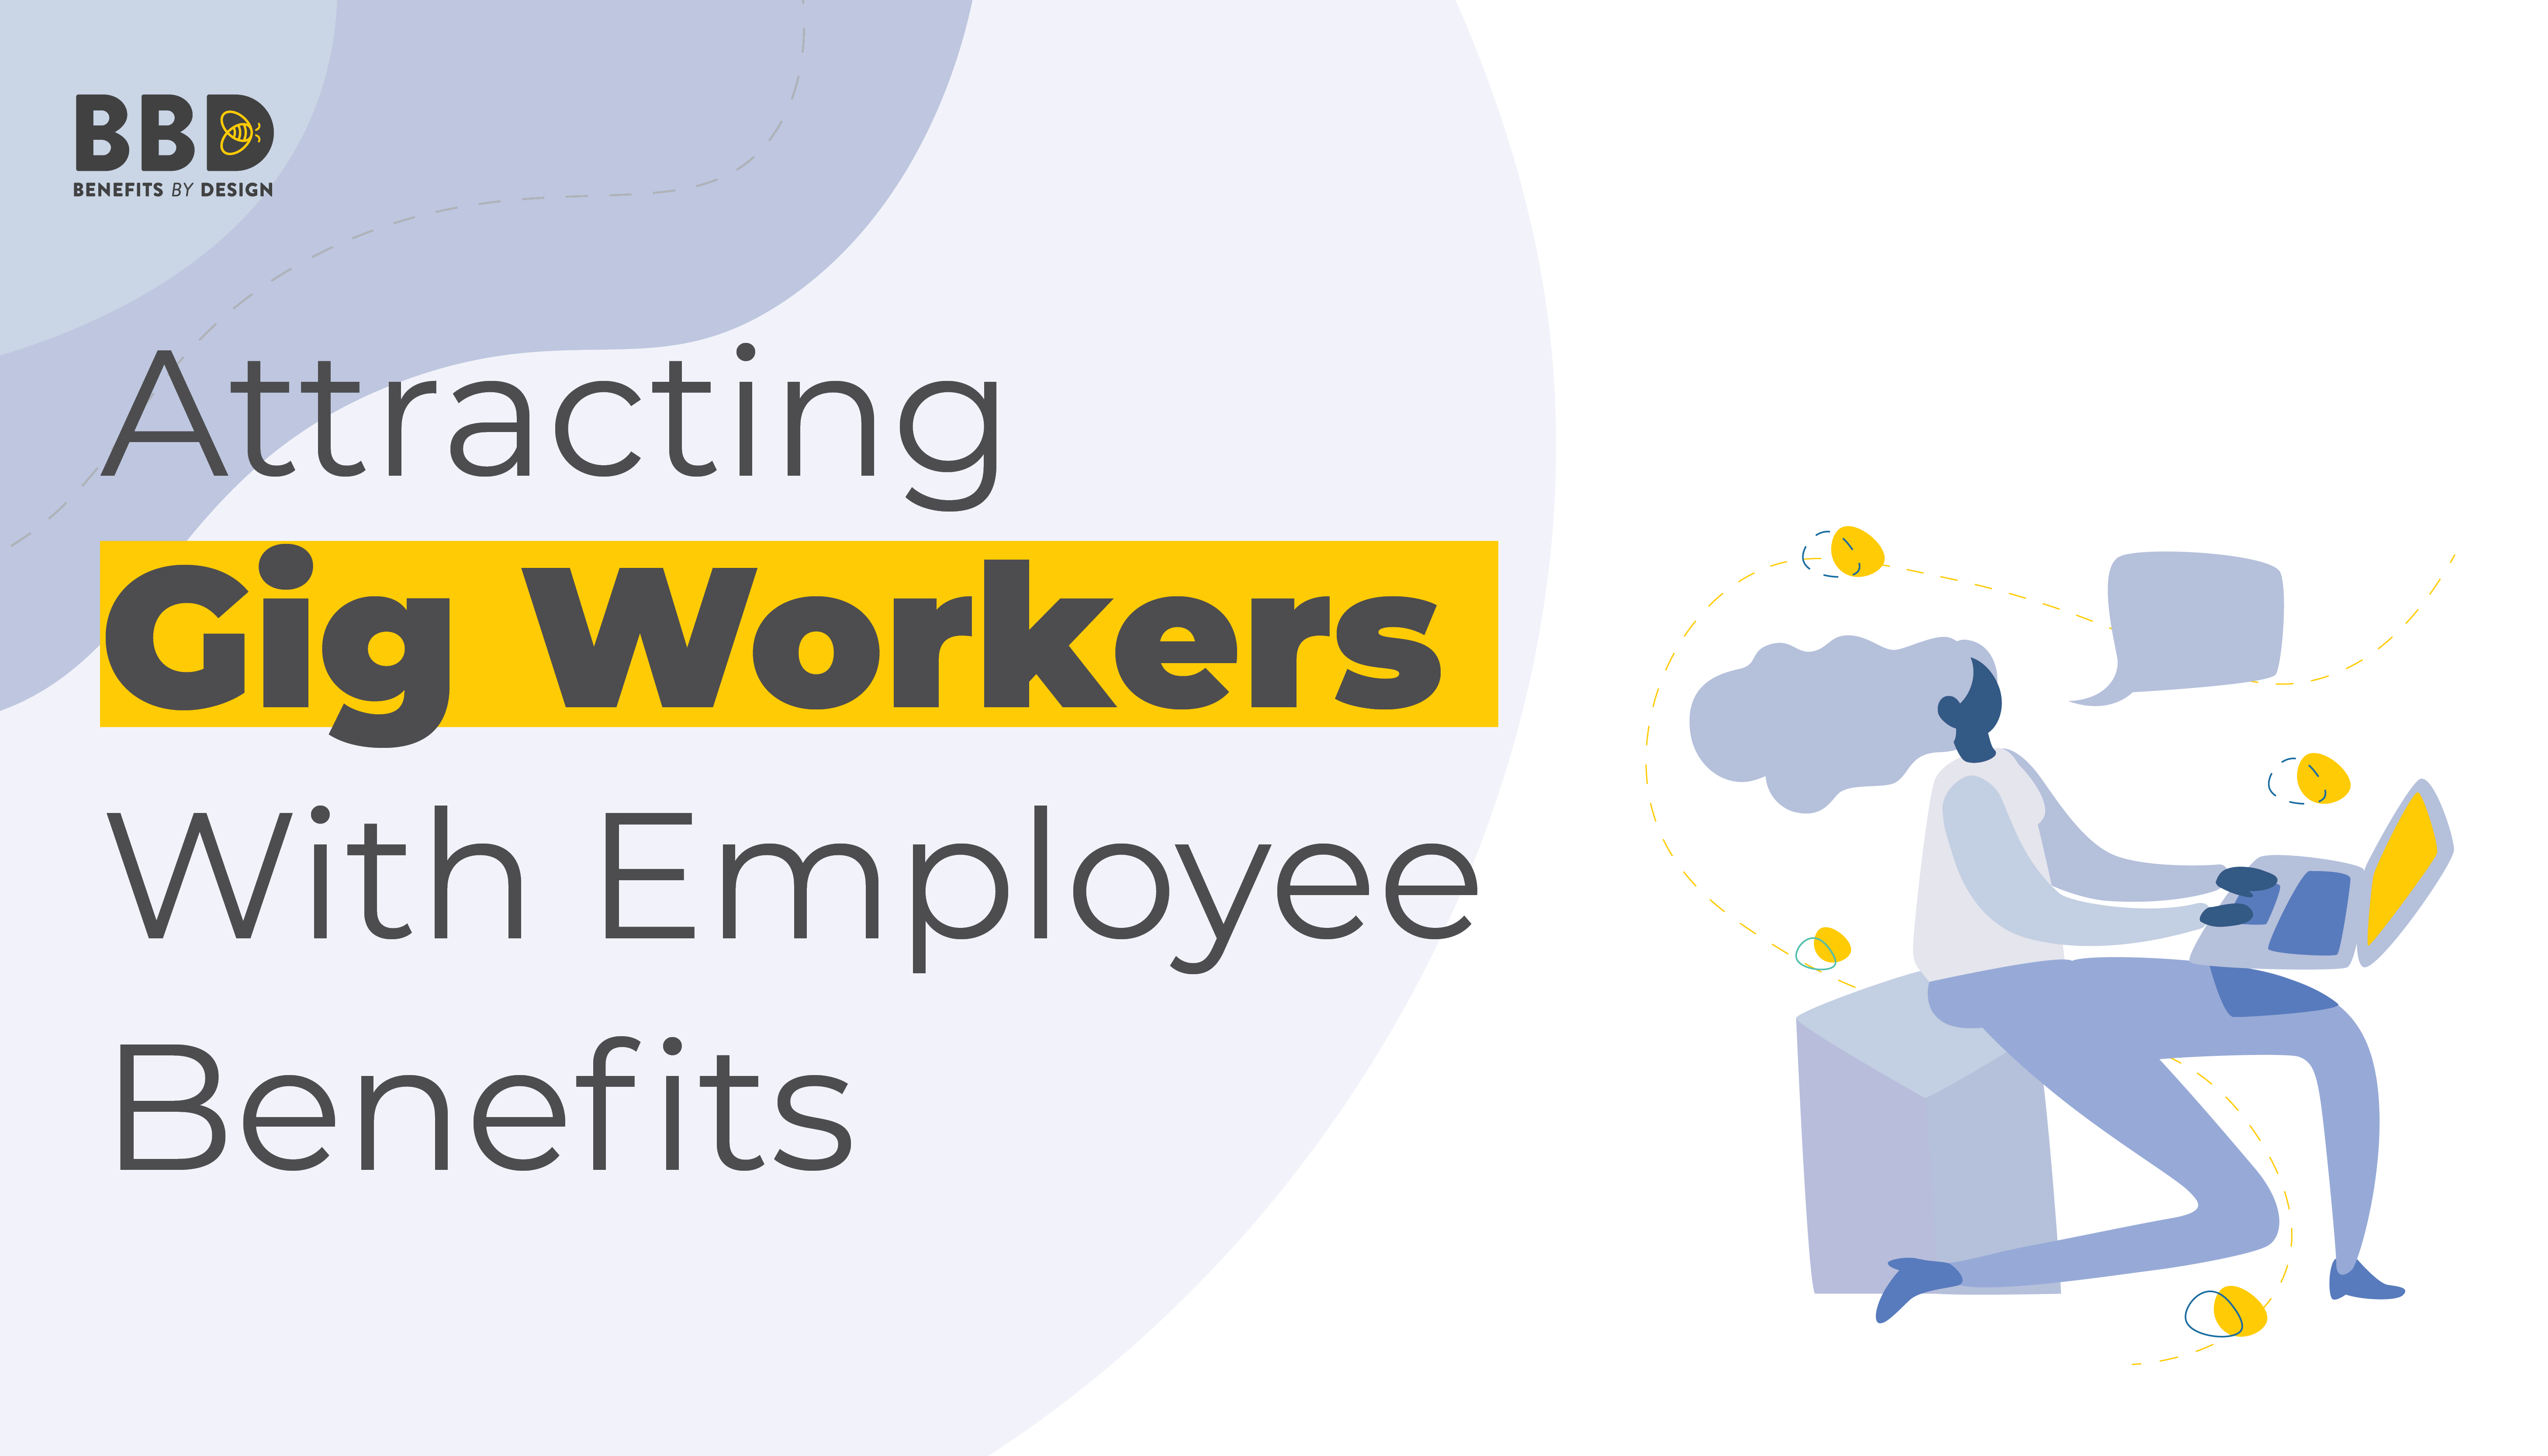 Attracting Gig Workers with Employee Benefits